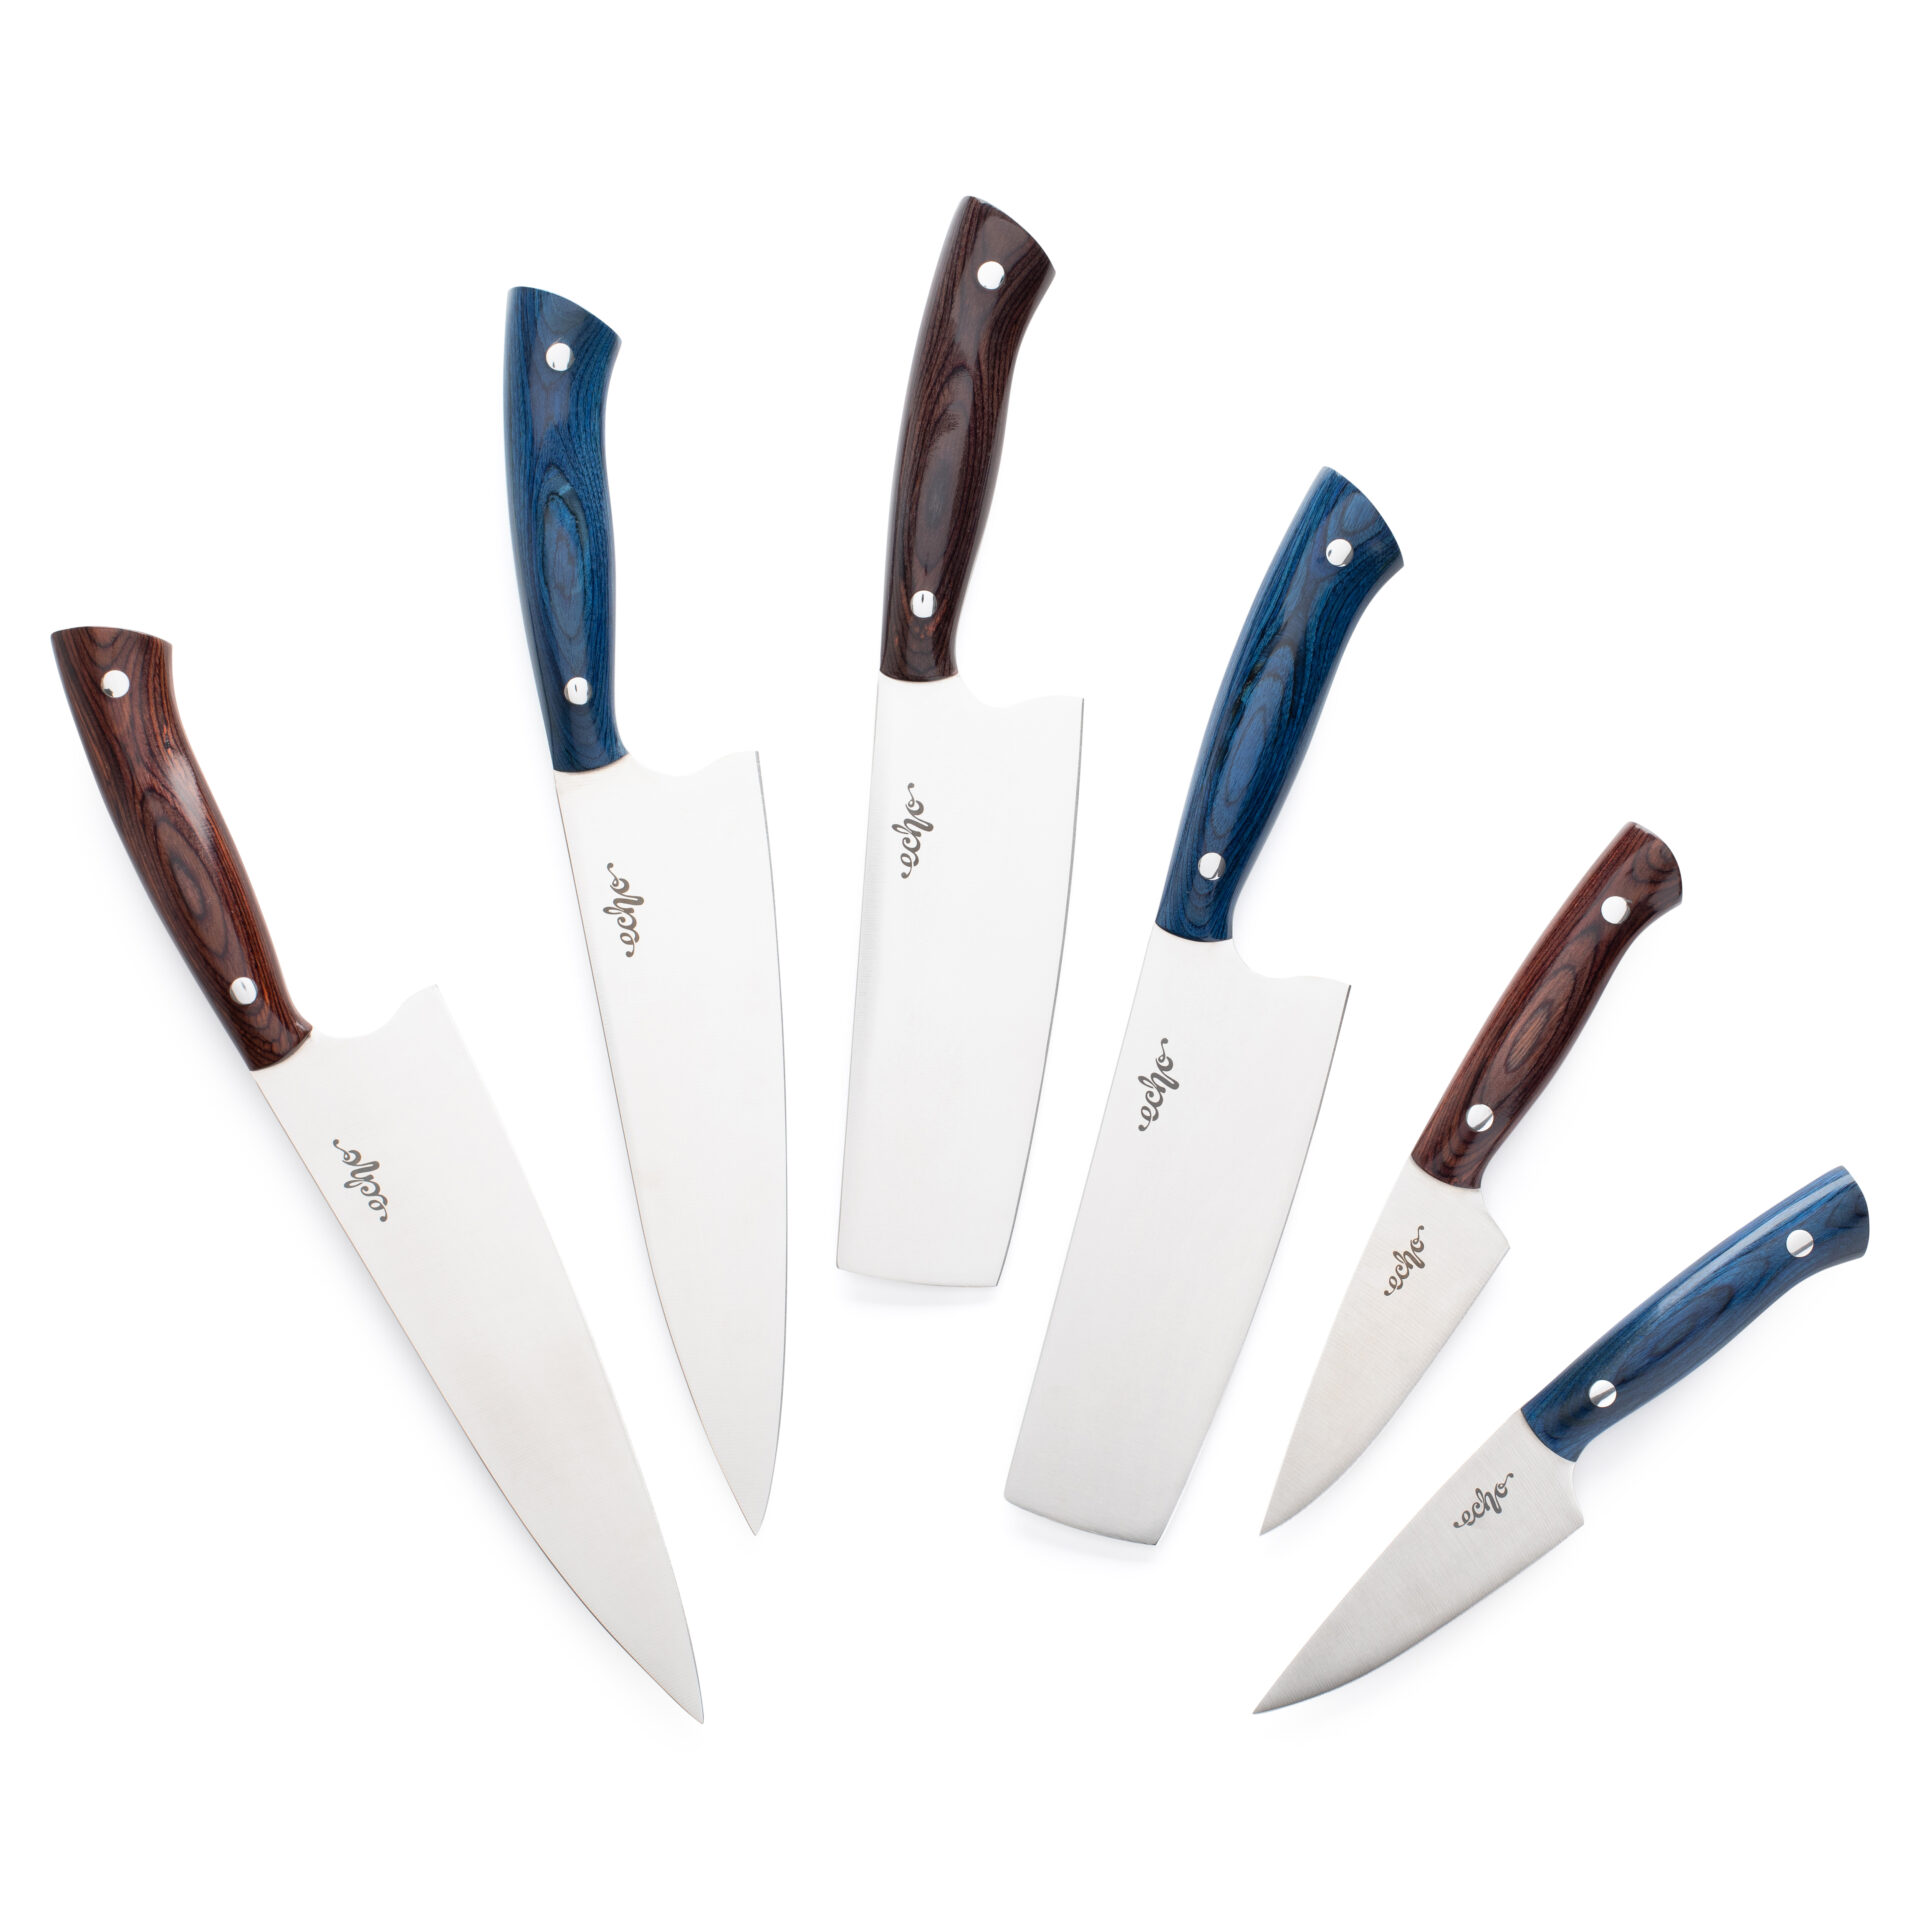 recipe guide: an image of 6 different knives